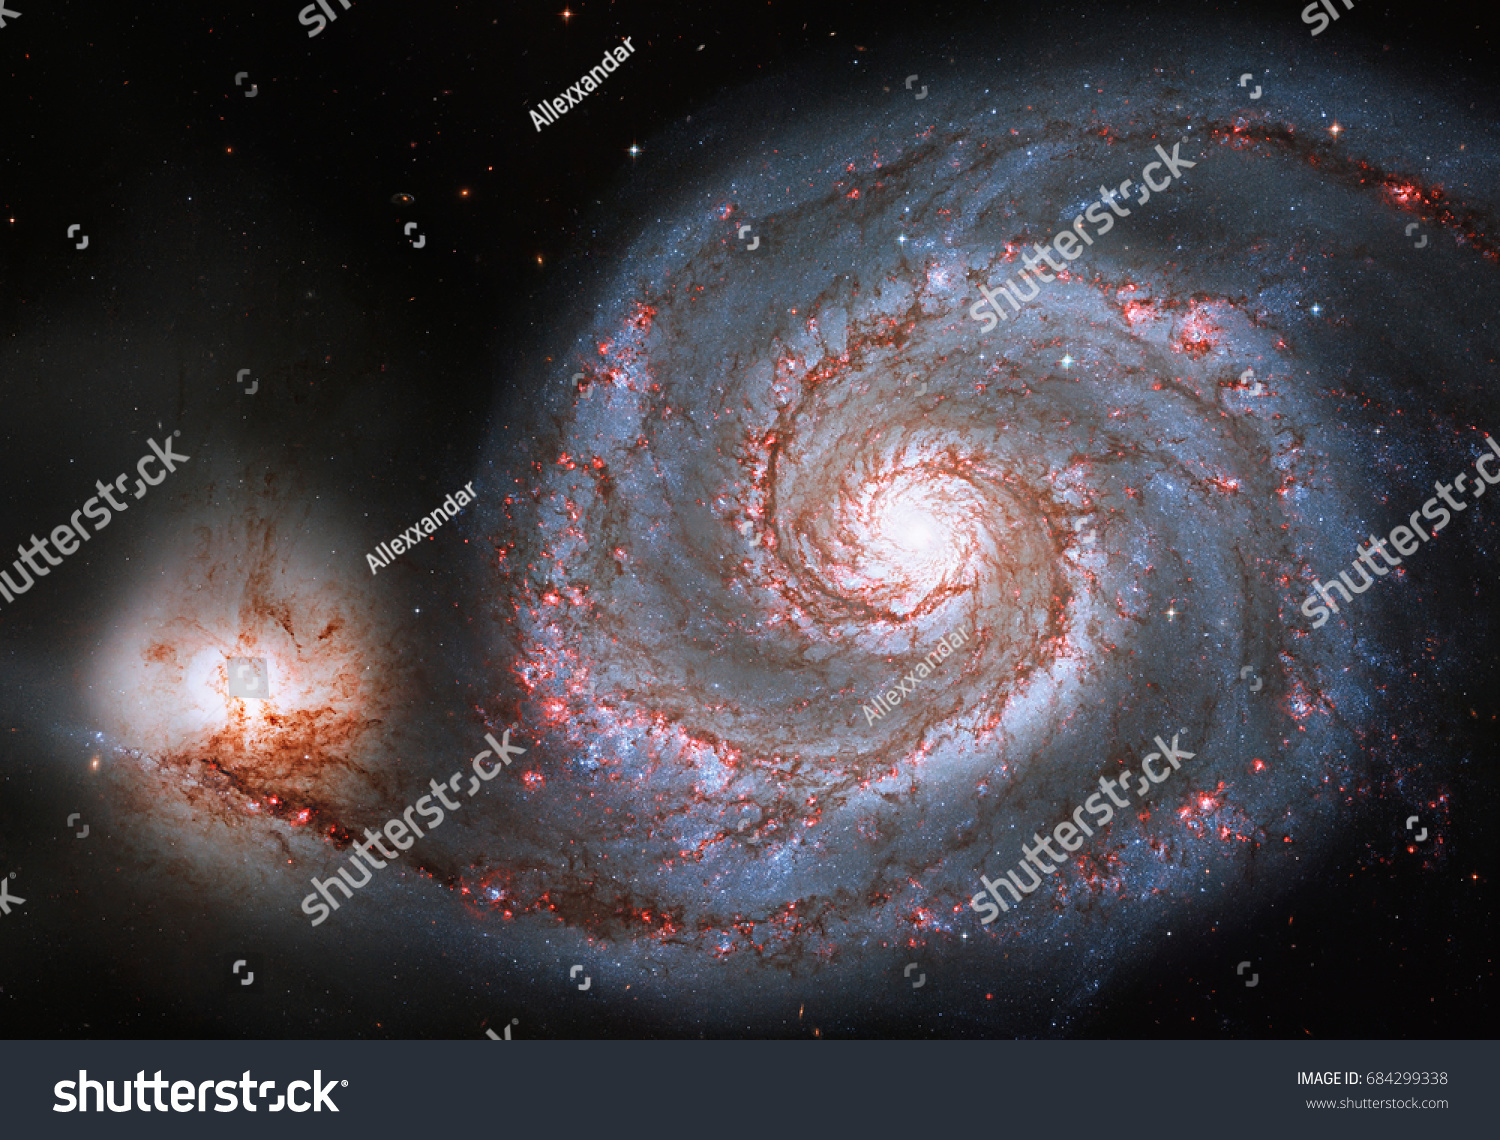 Whirlpool Galaxy. Spiral galaxy M51 or NGC 5194
Elements of this image are furnished by NASA. #684299338